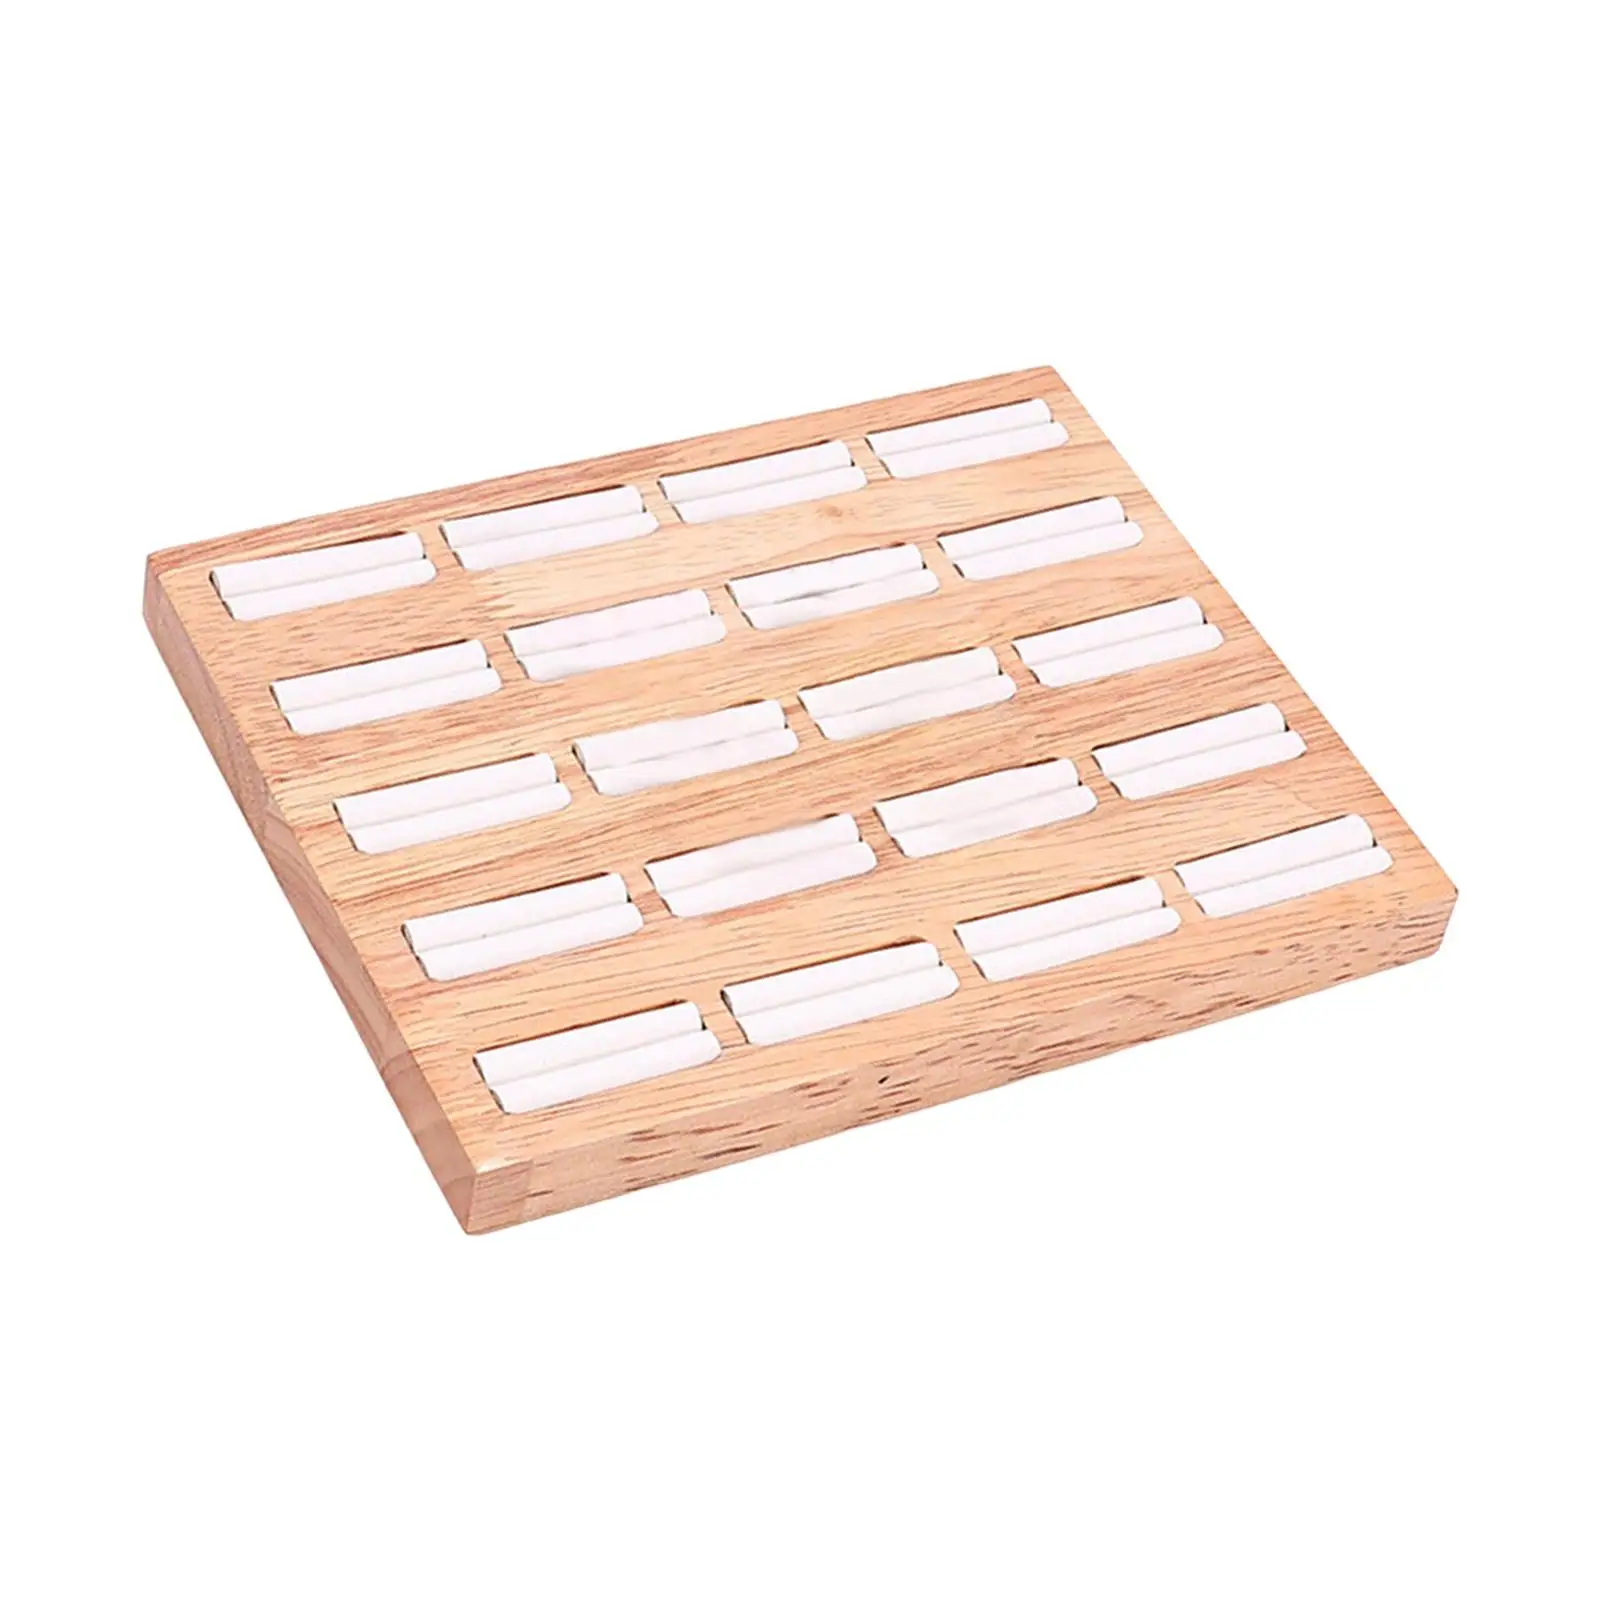 Wooden Ring Tray Decoration Multipurpose Storage Organizer for Earrings Shop Window Vanity Countertop Bedside Table Girls